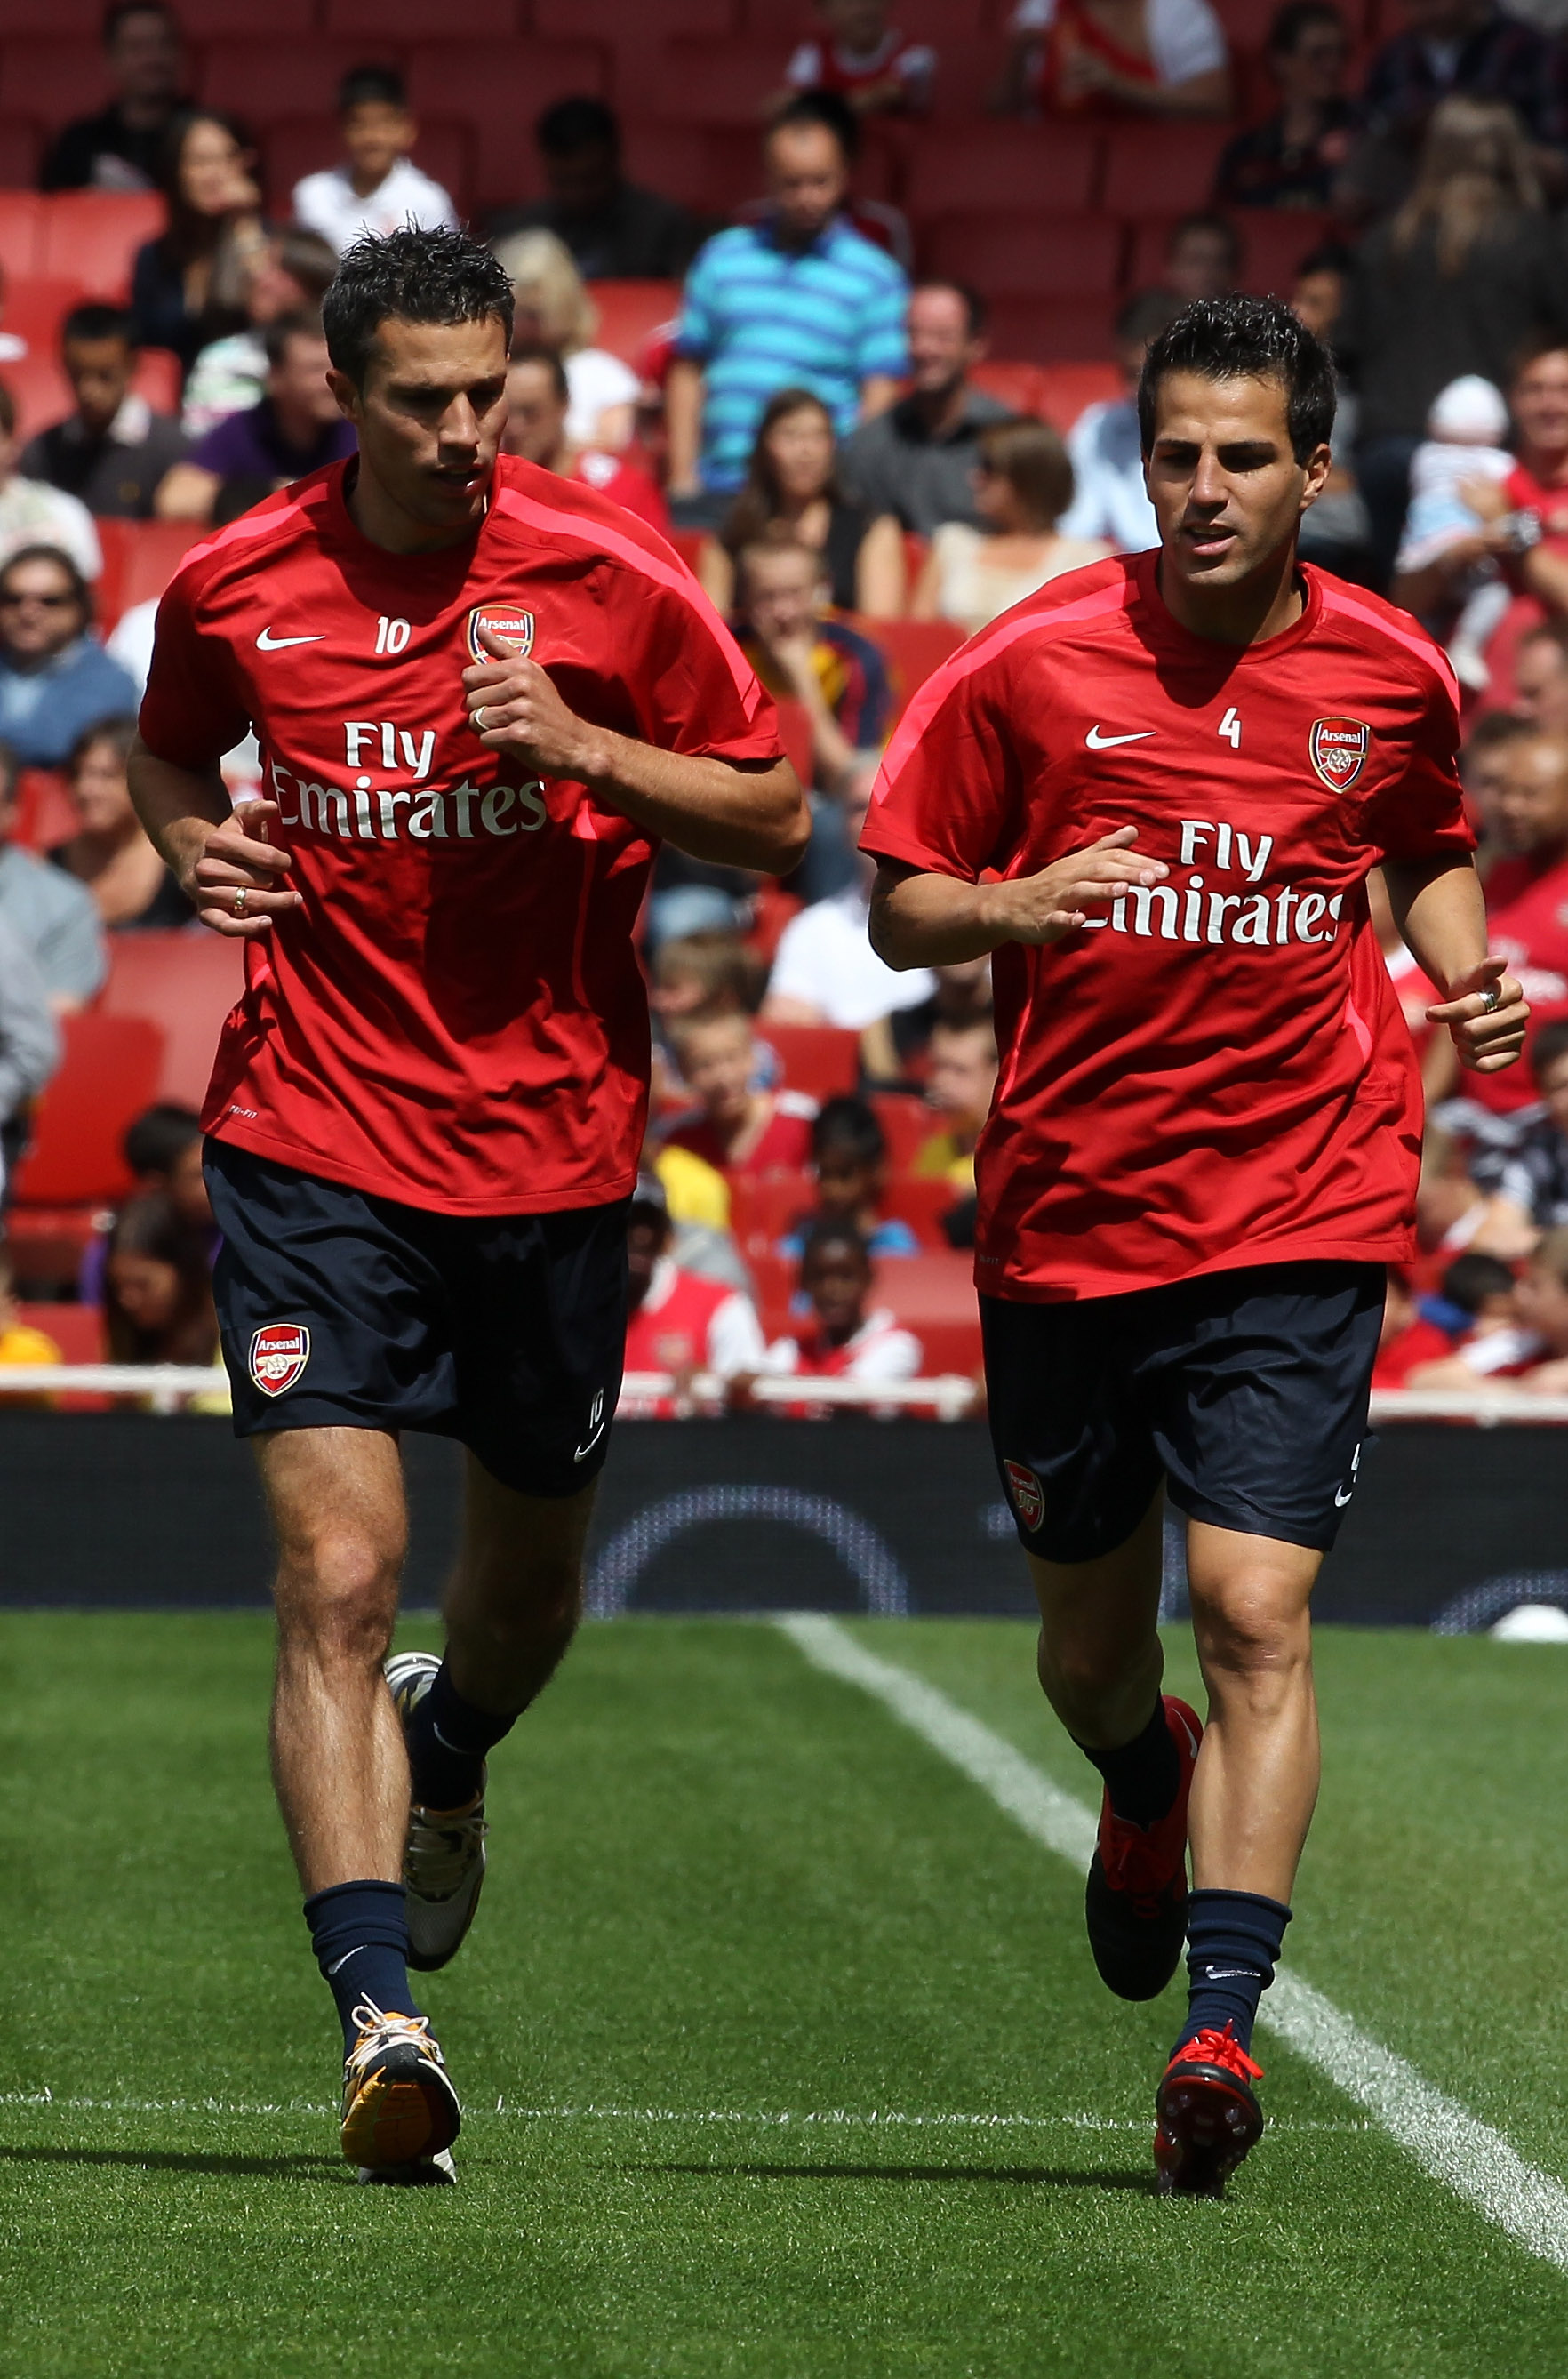 LONDON, ENGLAND - AUGUST 05:  Cesc Fabregas (r) and Robin van Persie attend an Arsenal open training session at Emirates Stadium on August 5, 2010 in London, England.  (Photo by Bryn Lennon/Getty Images)